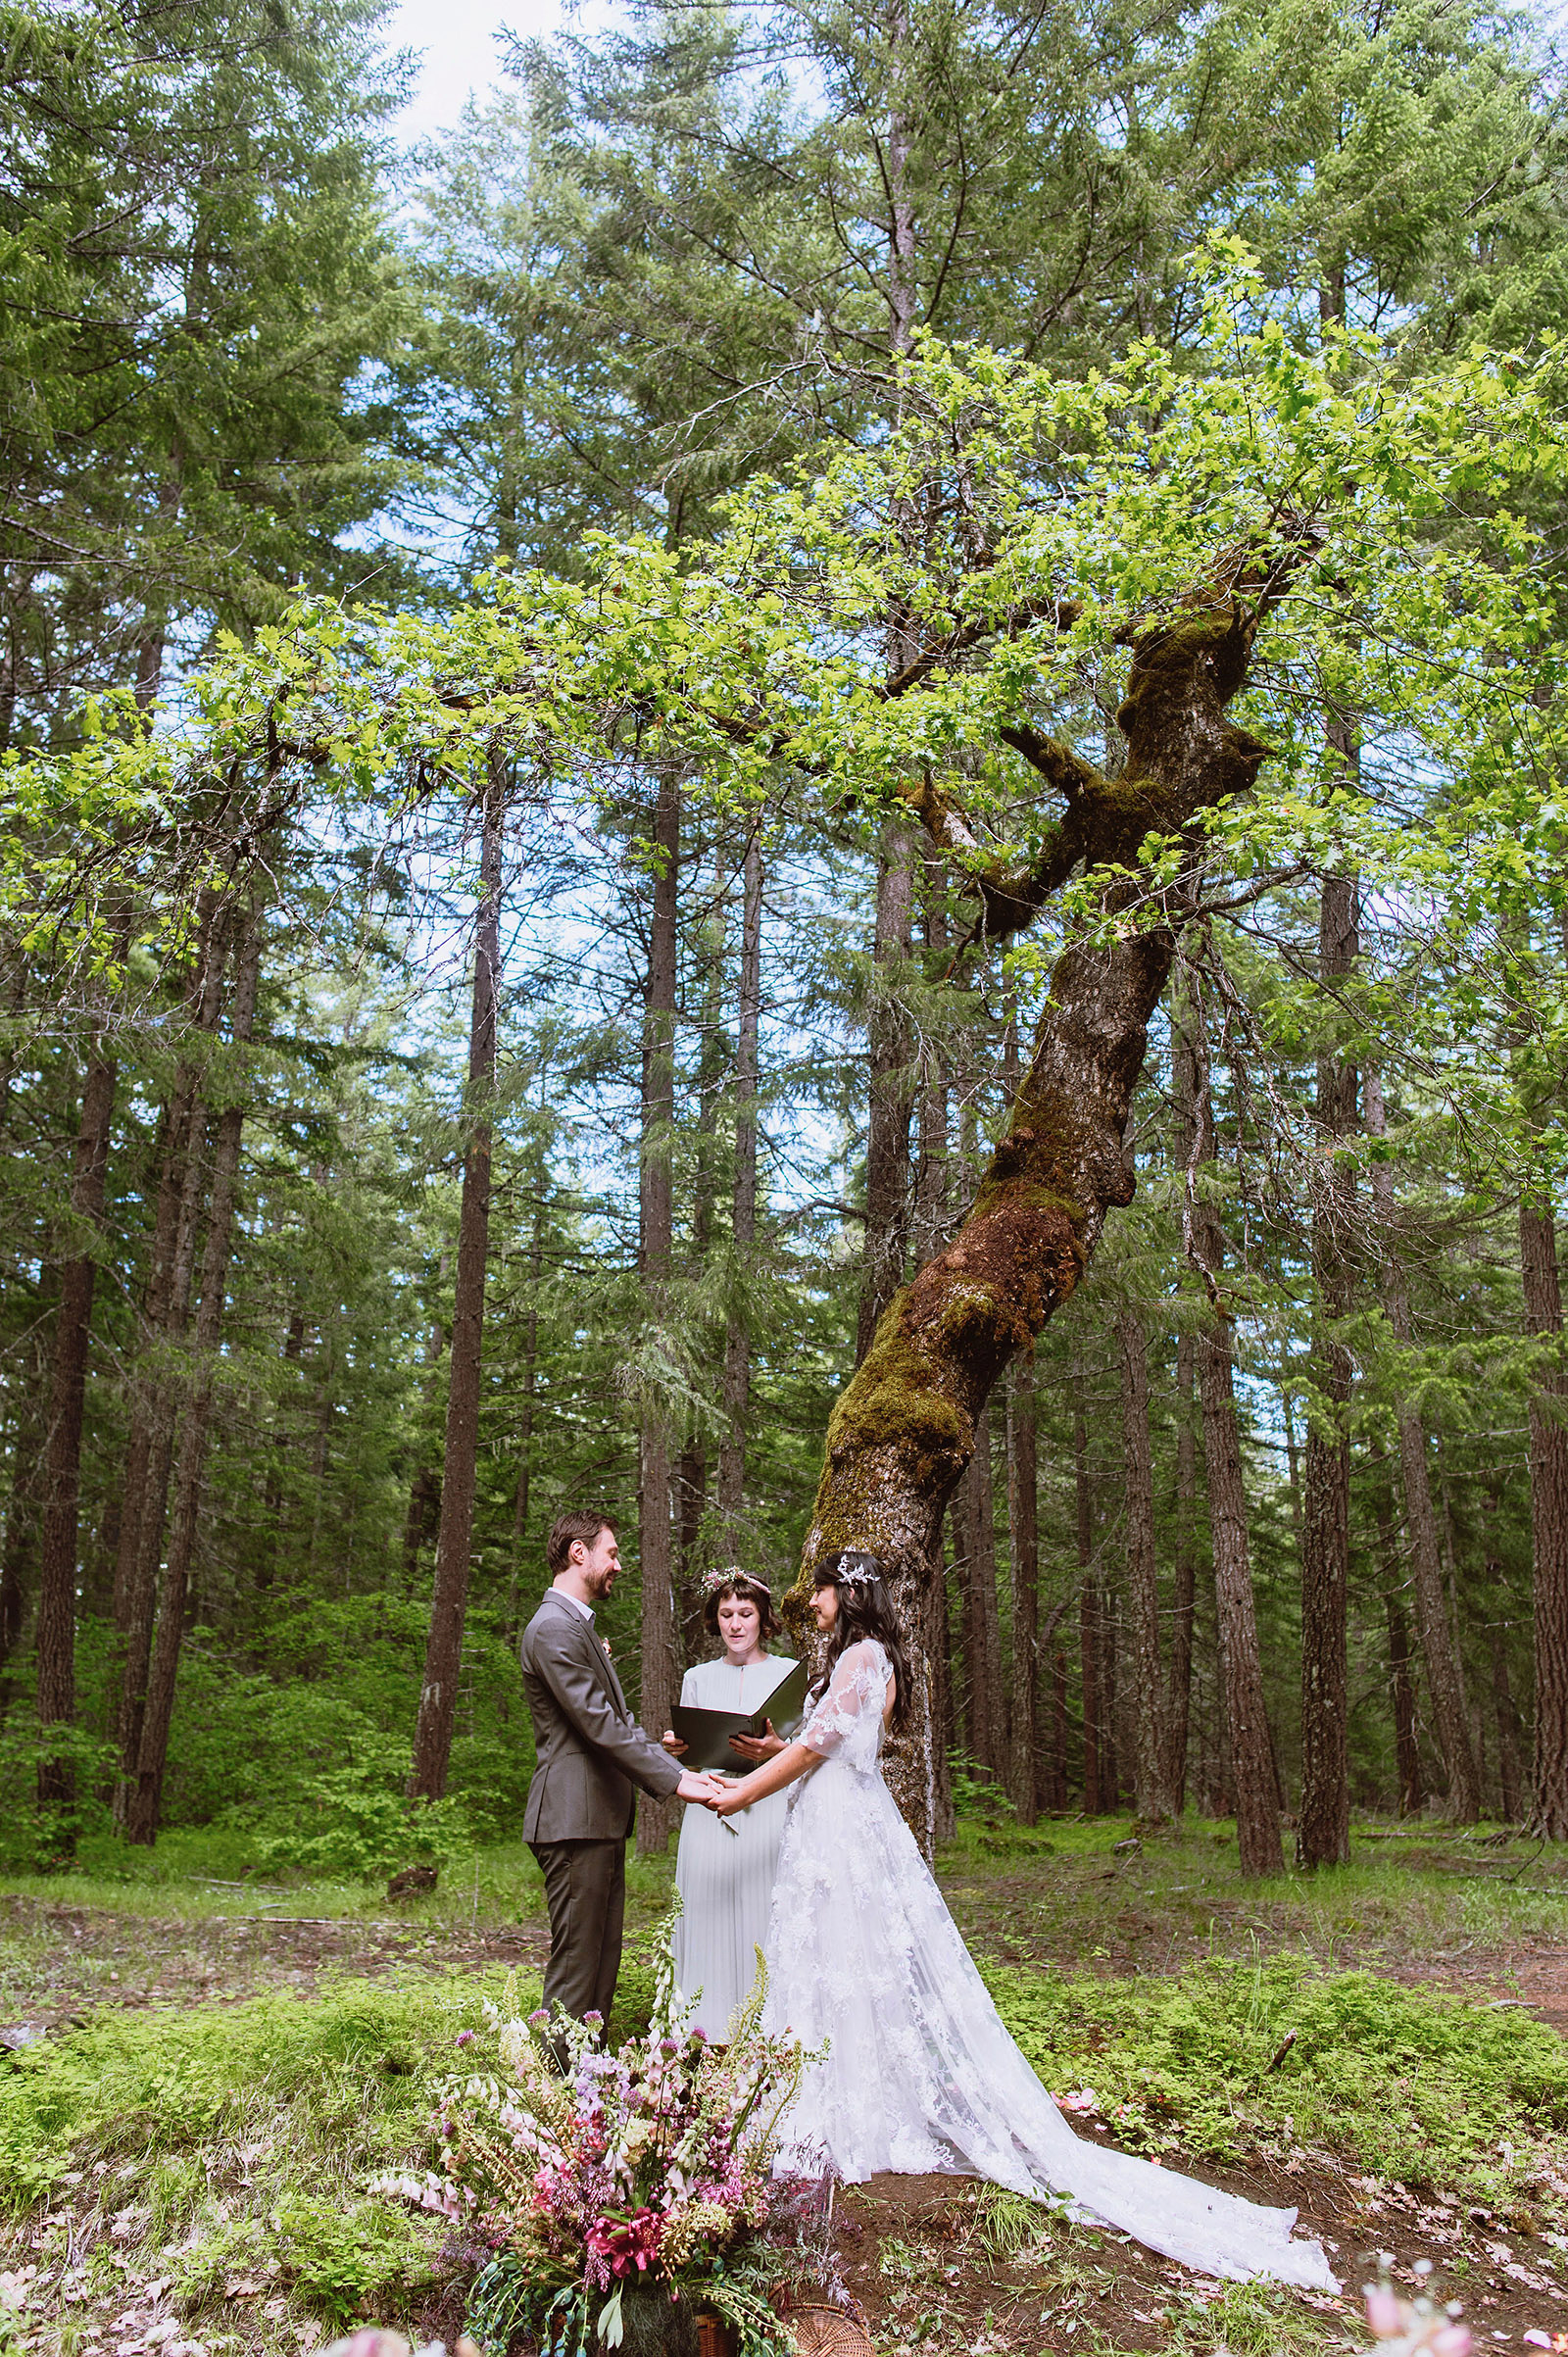 Bride and groom exchanging vows at the base of a tree - Trout Lake Wedding, WA